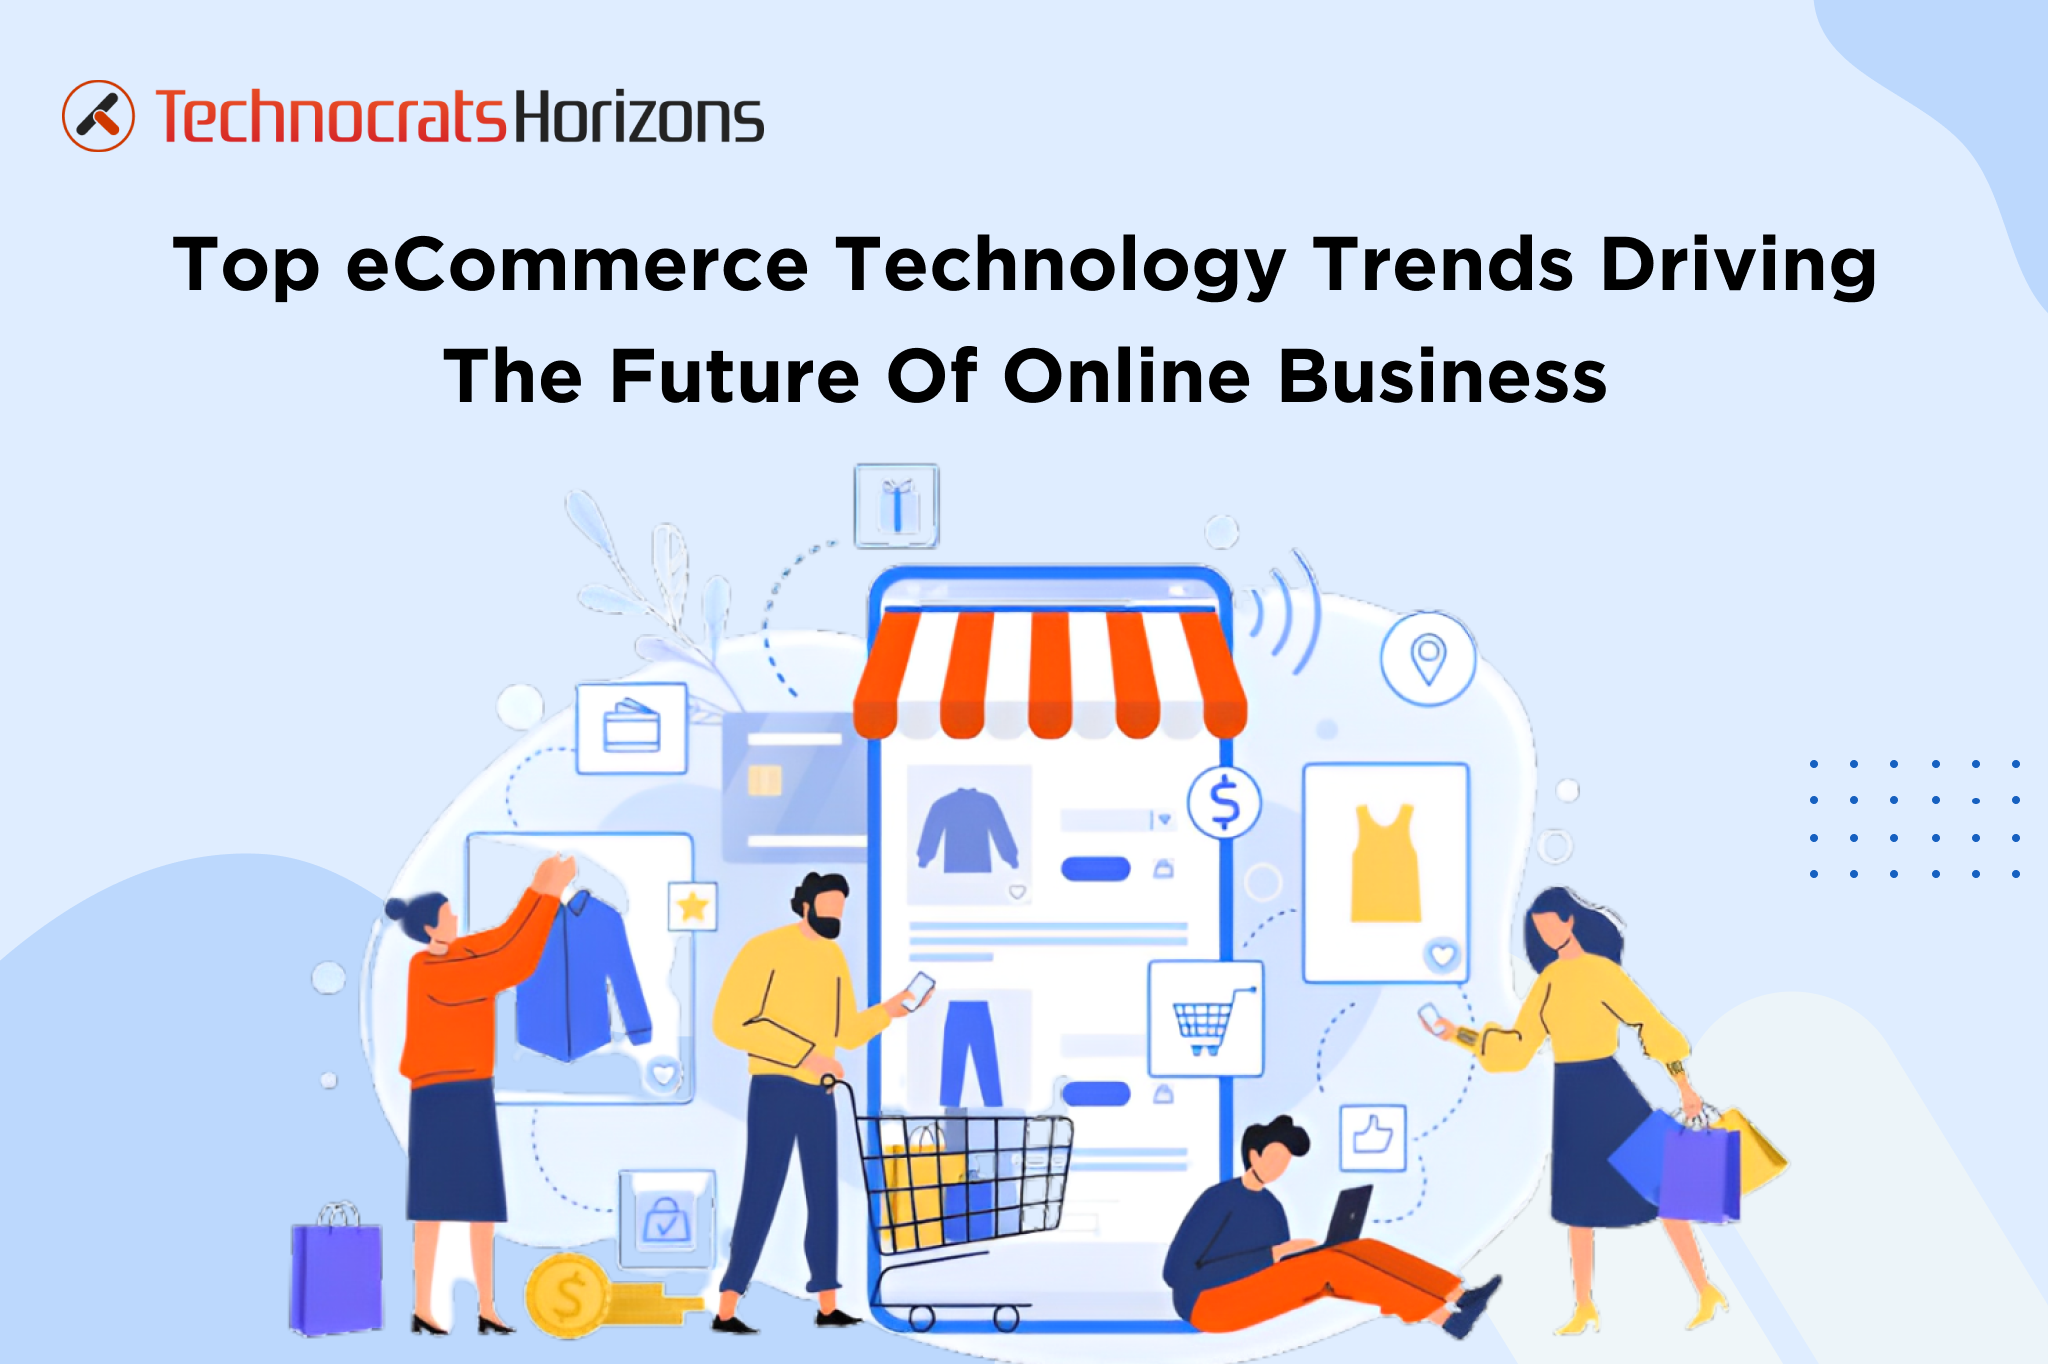 Top eCommerce Technology Trends Driving the Future of Online Business